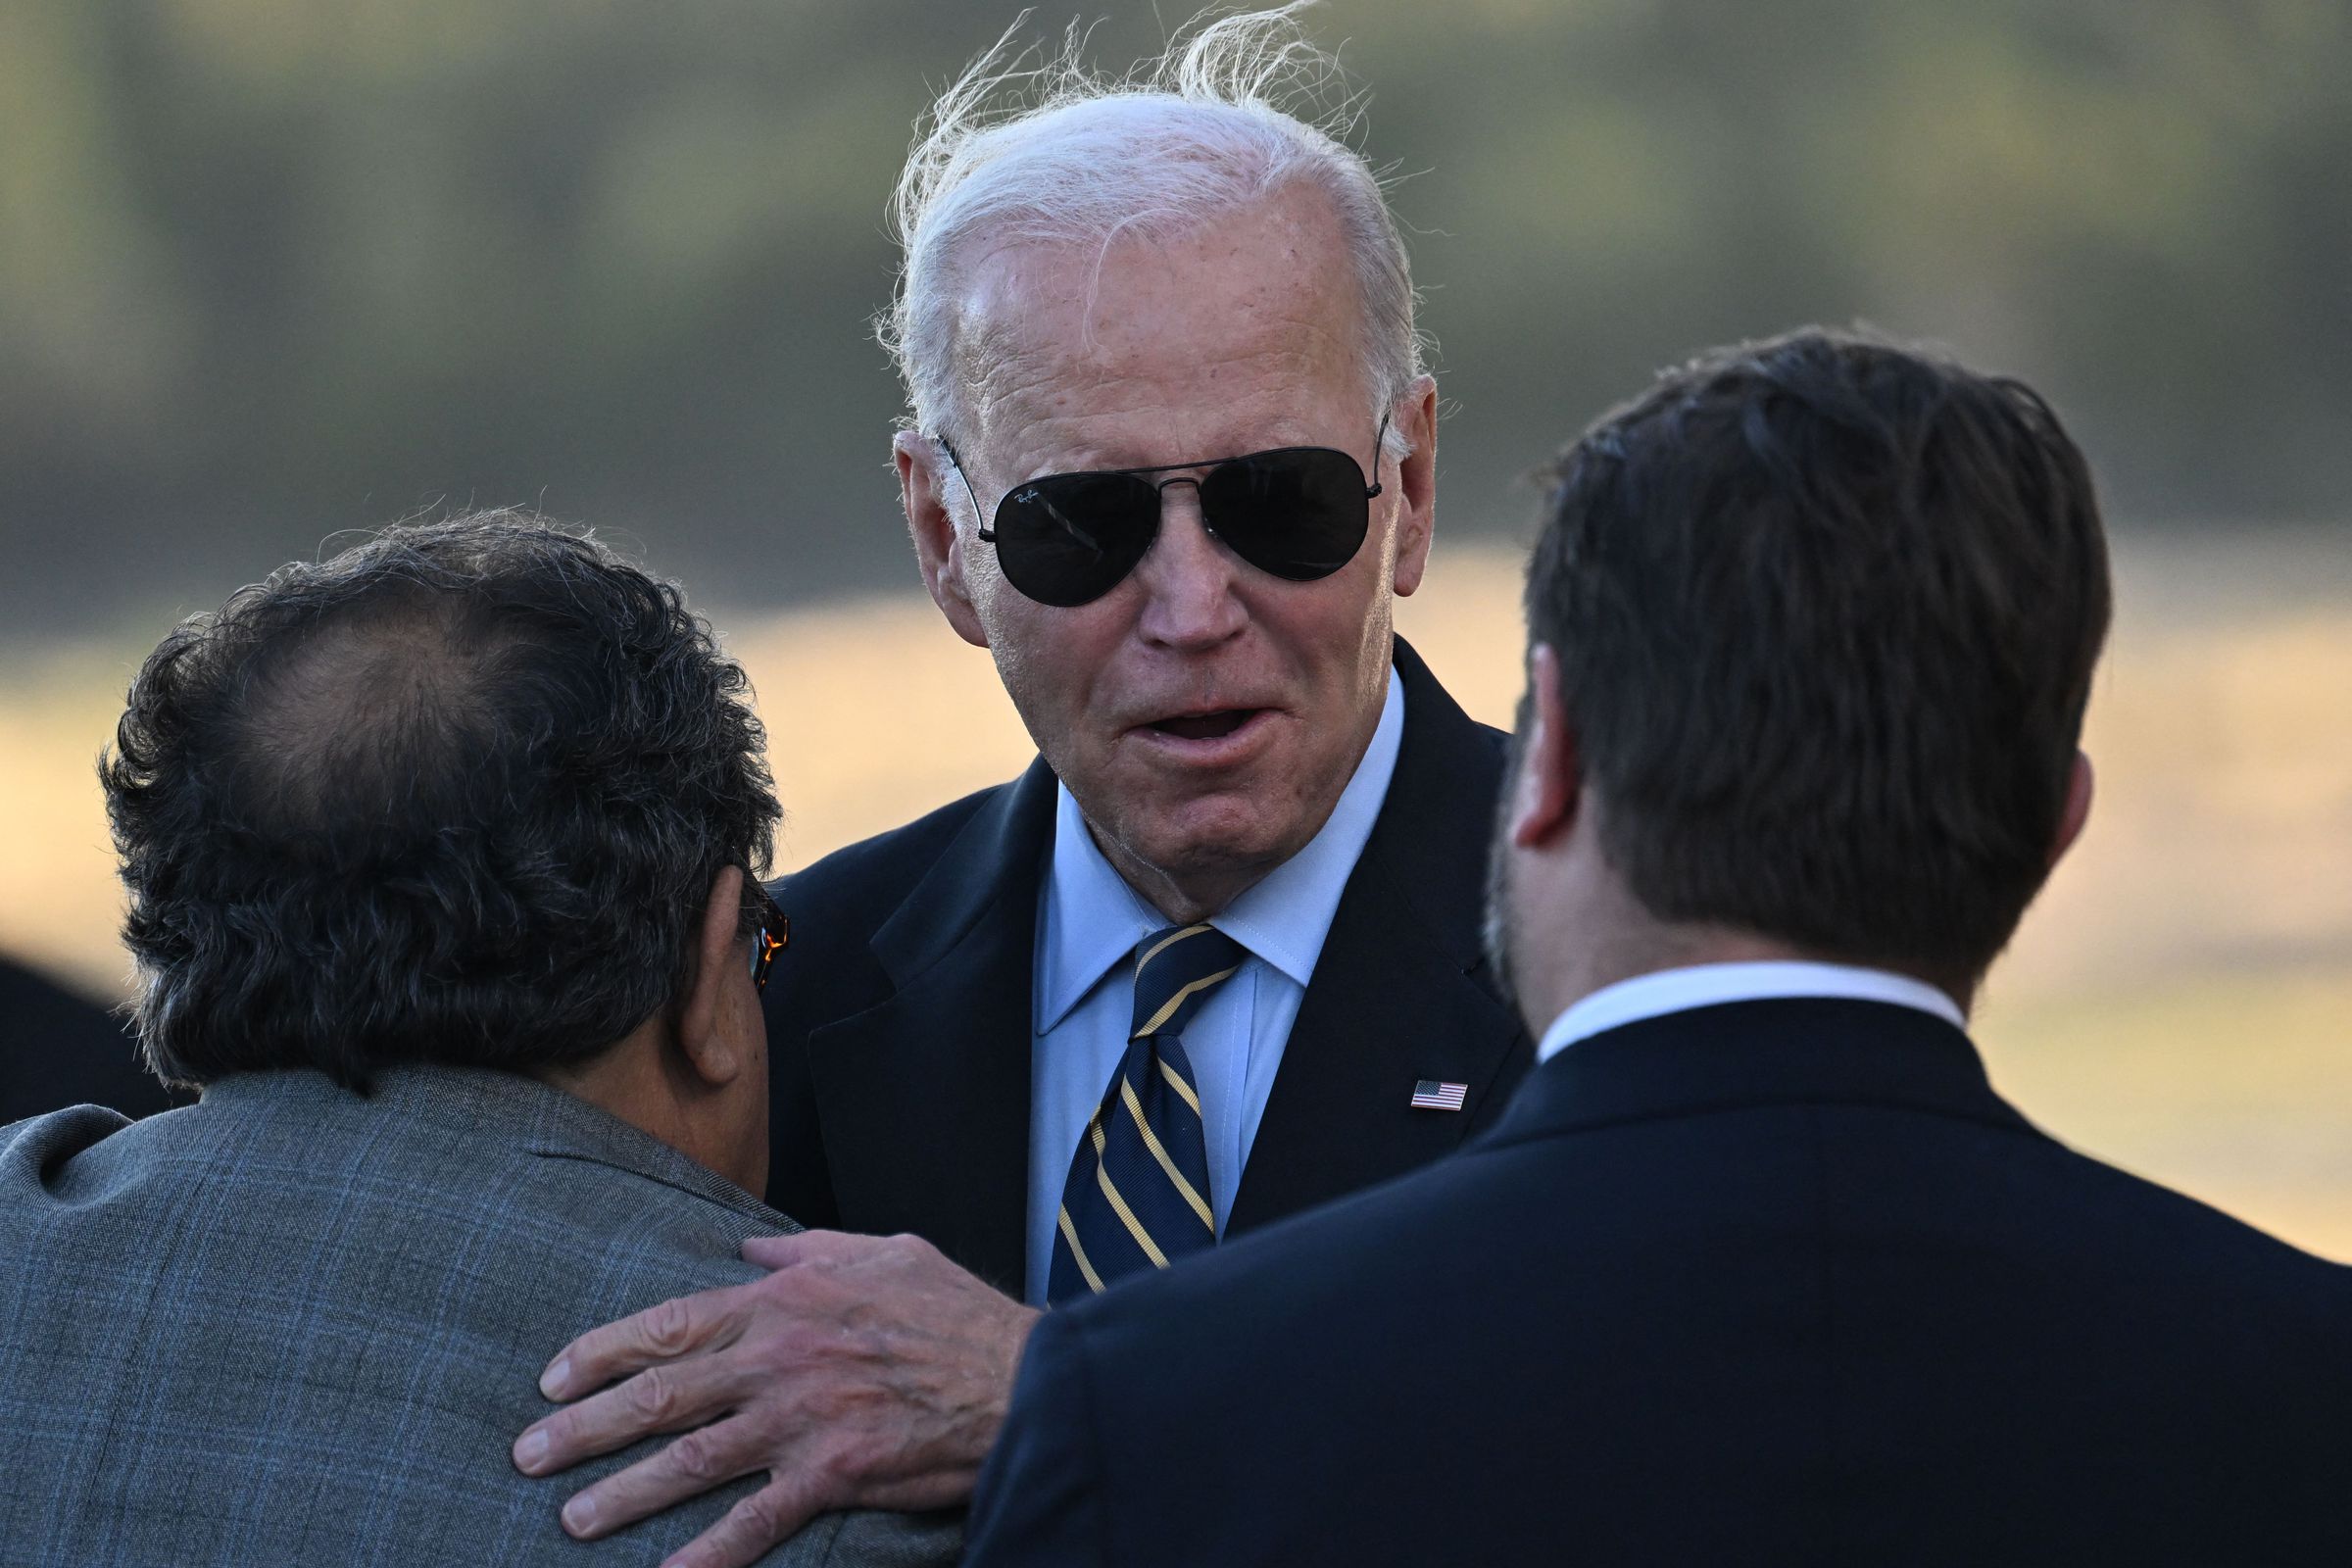 Joe Biden wearing sunglasses and greeting two other people in suits.